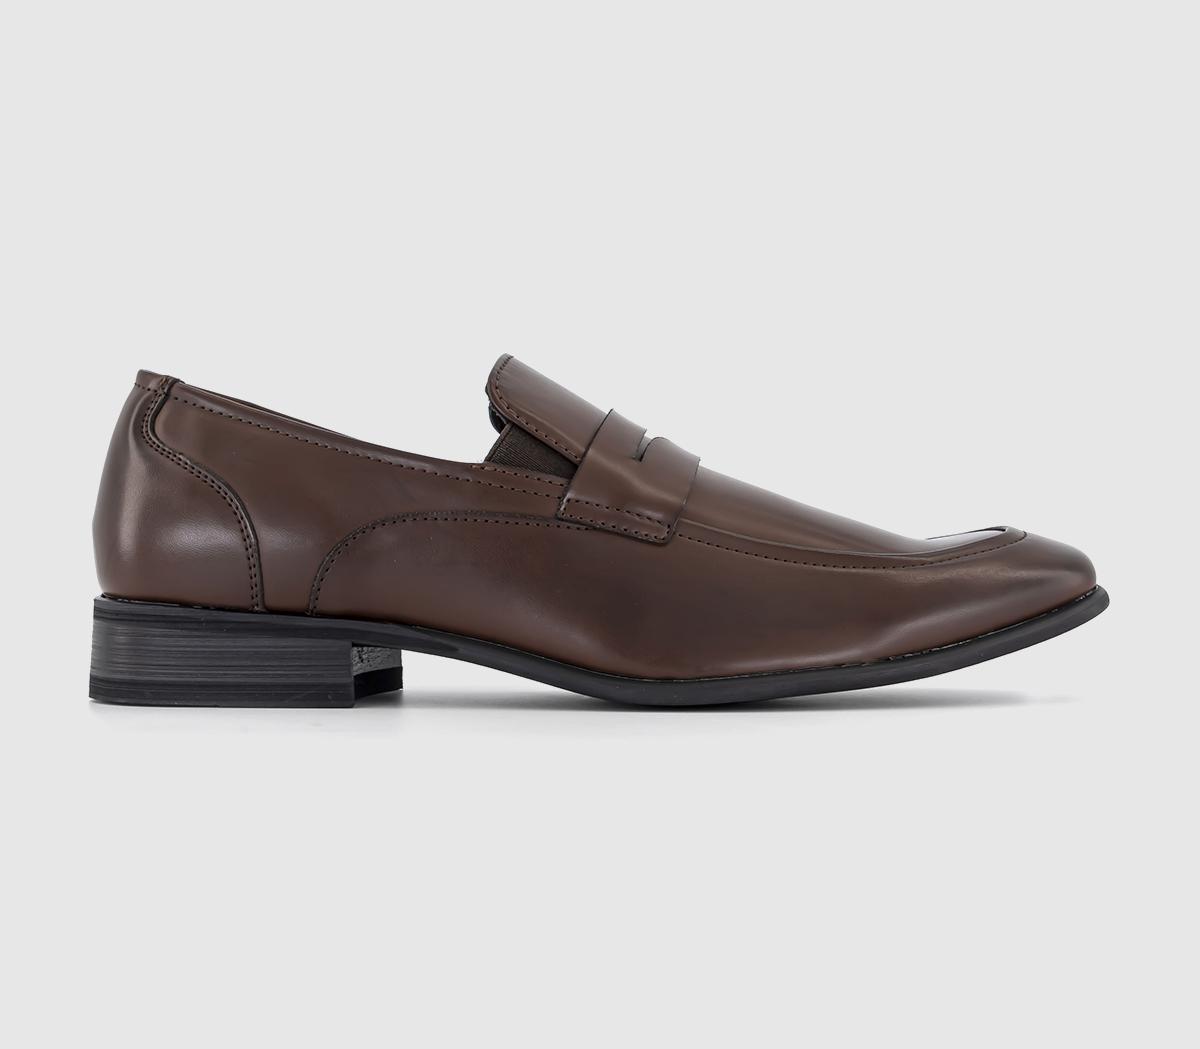 OFFICEMadison Penny LoafersBrown